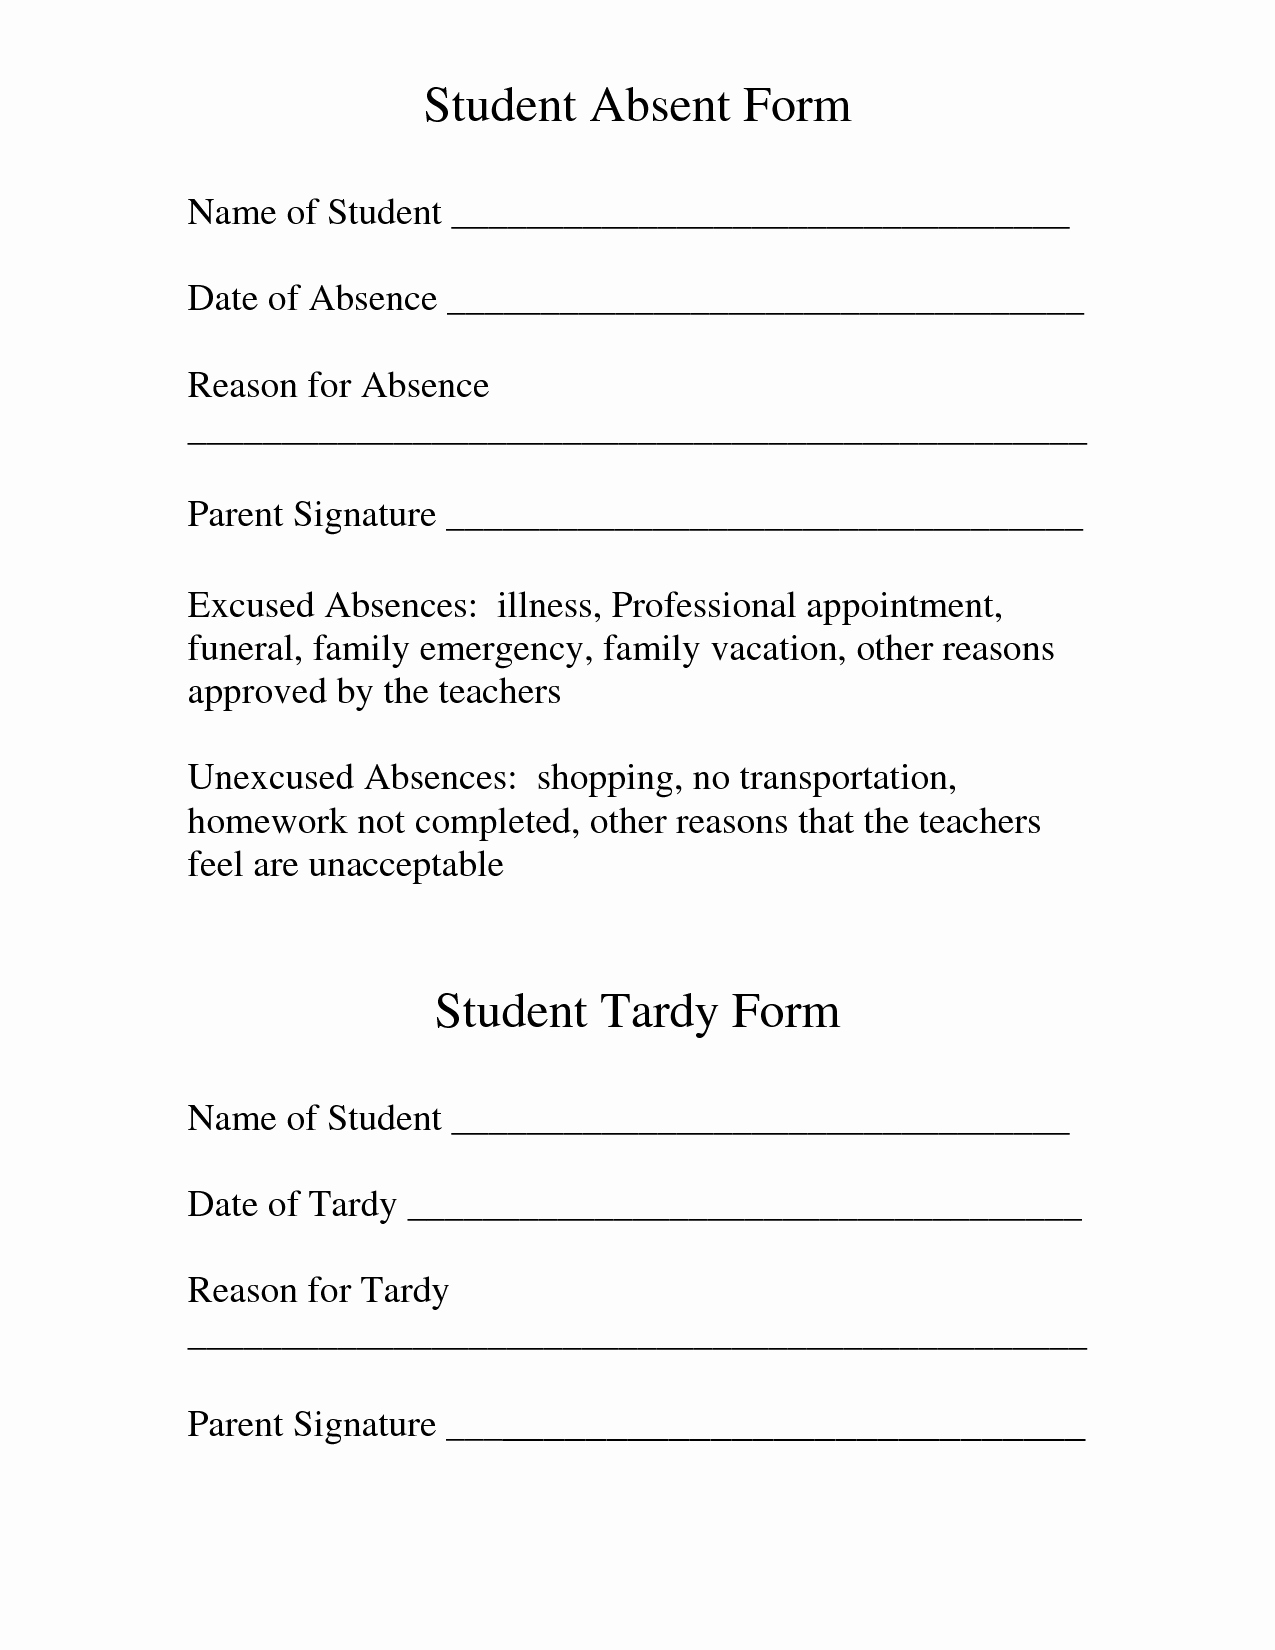 School Absence Excuse Letter Template Luxury Best S Tardy Excuse Template for Work School